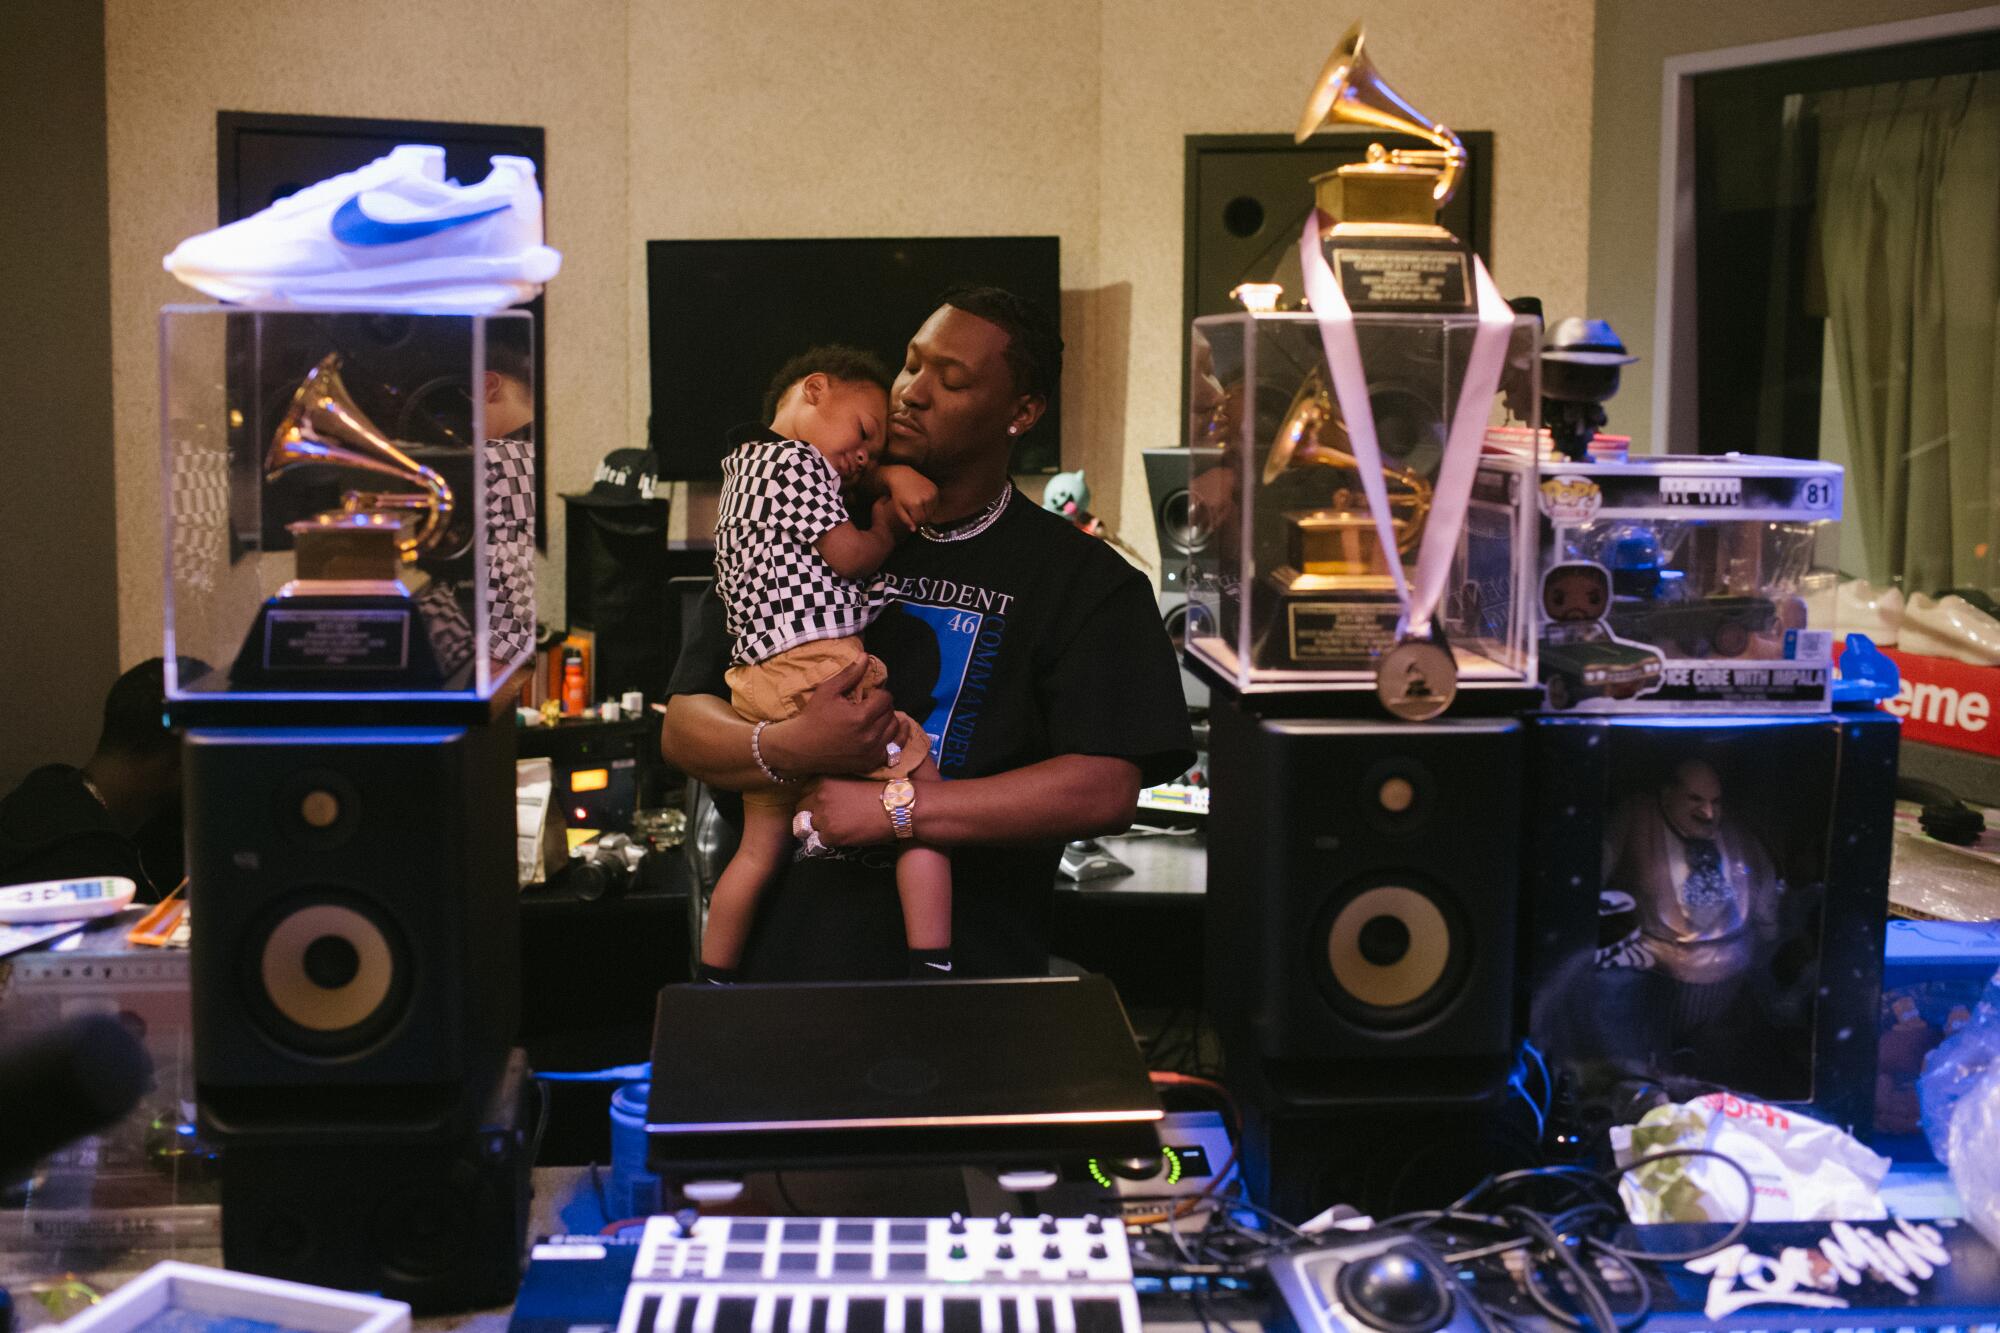 A music producer in the studio, holding a small child